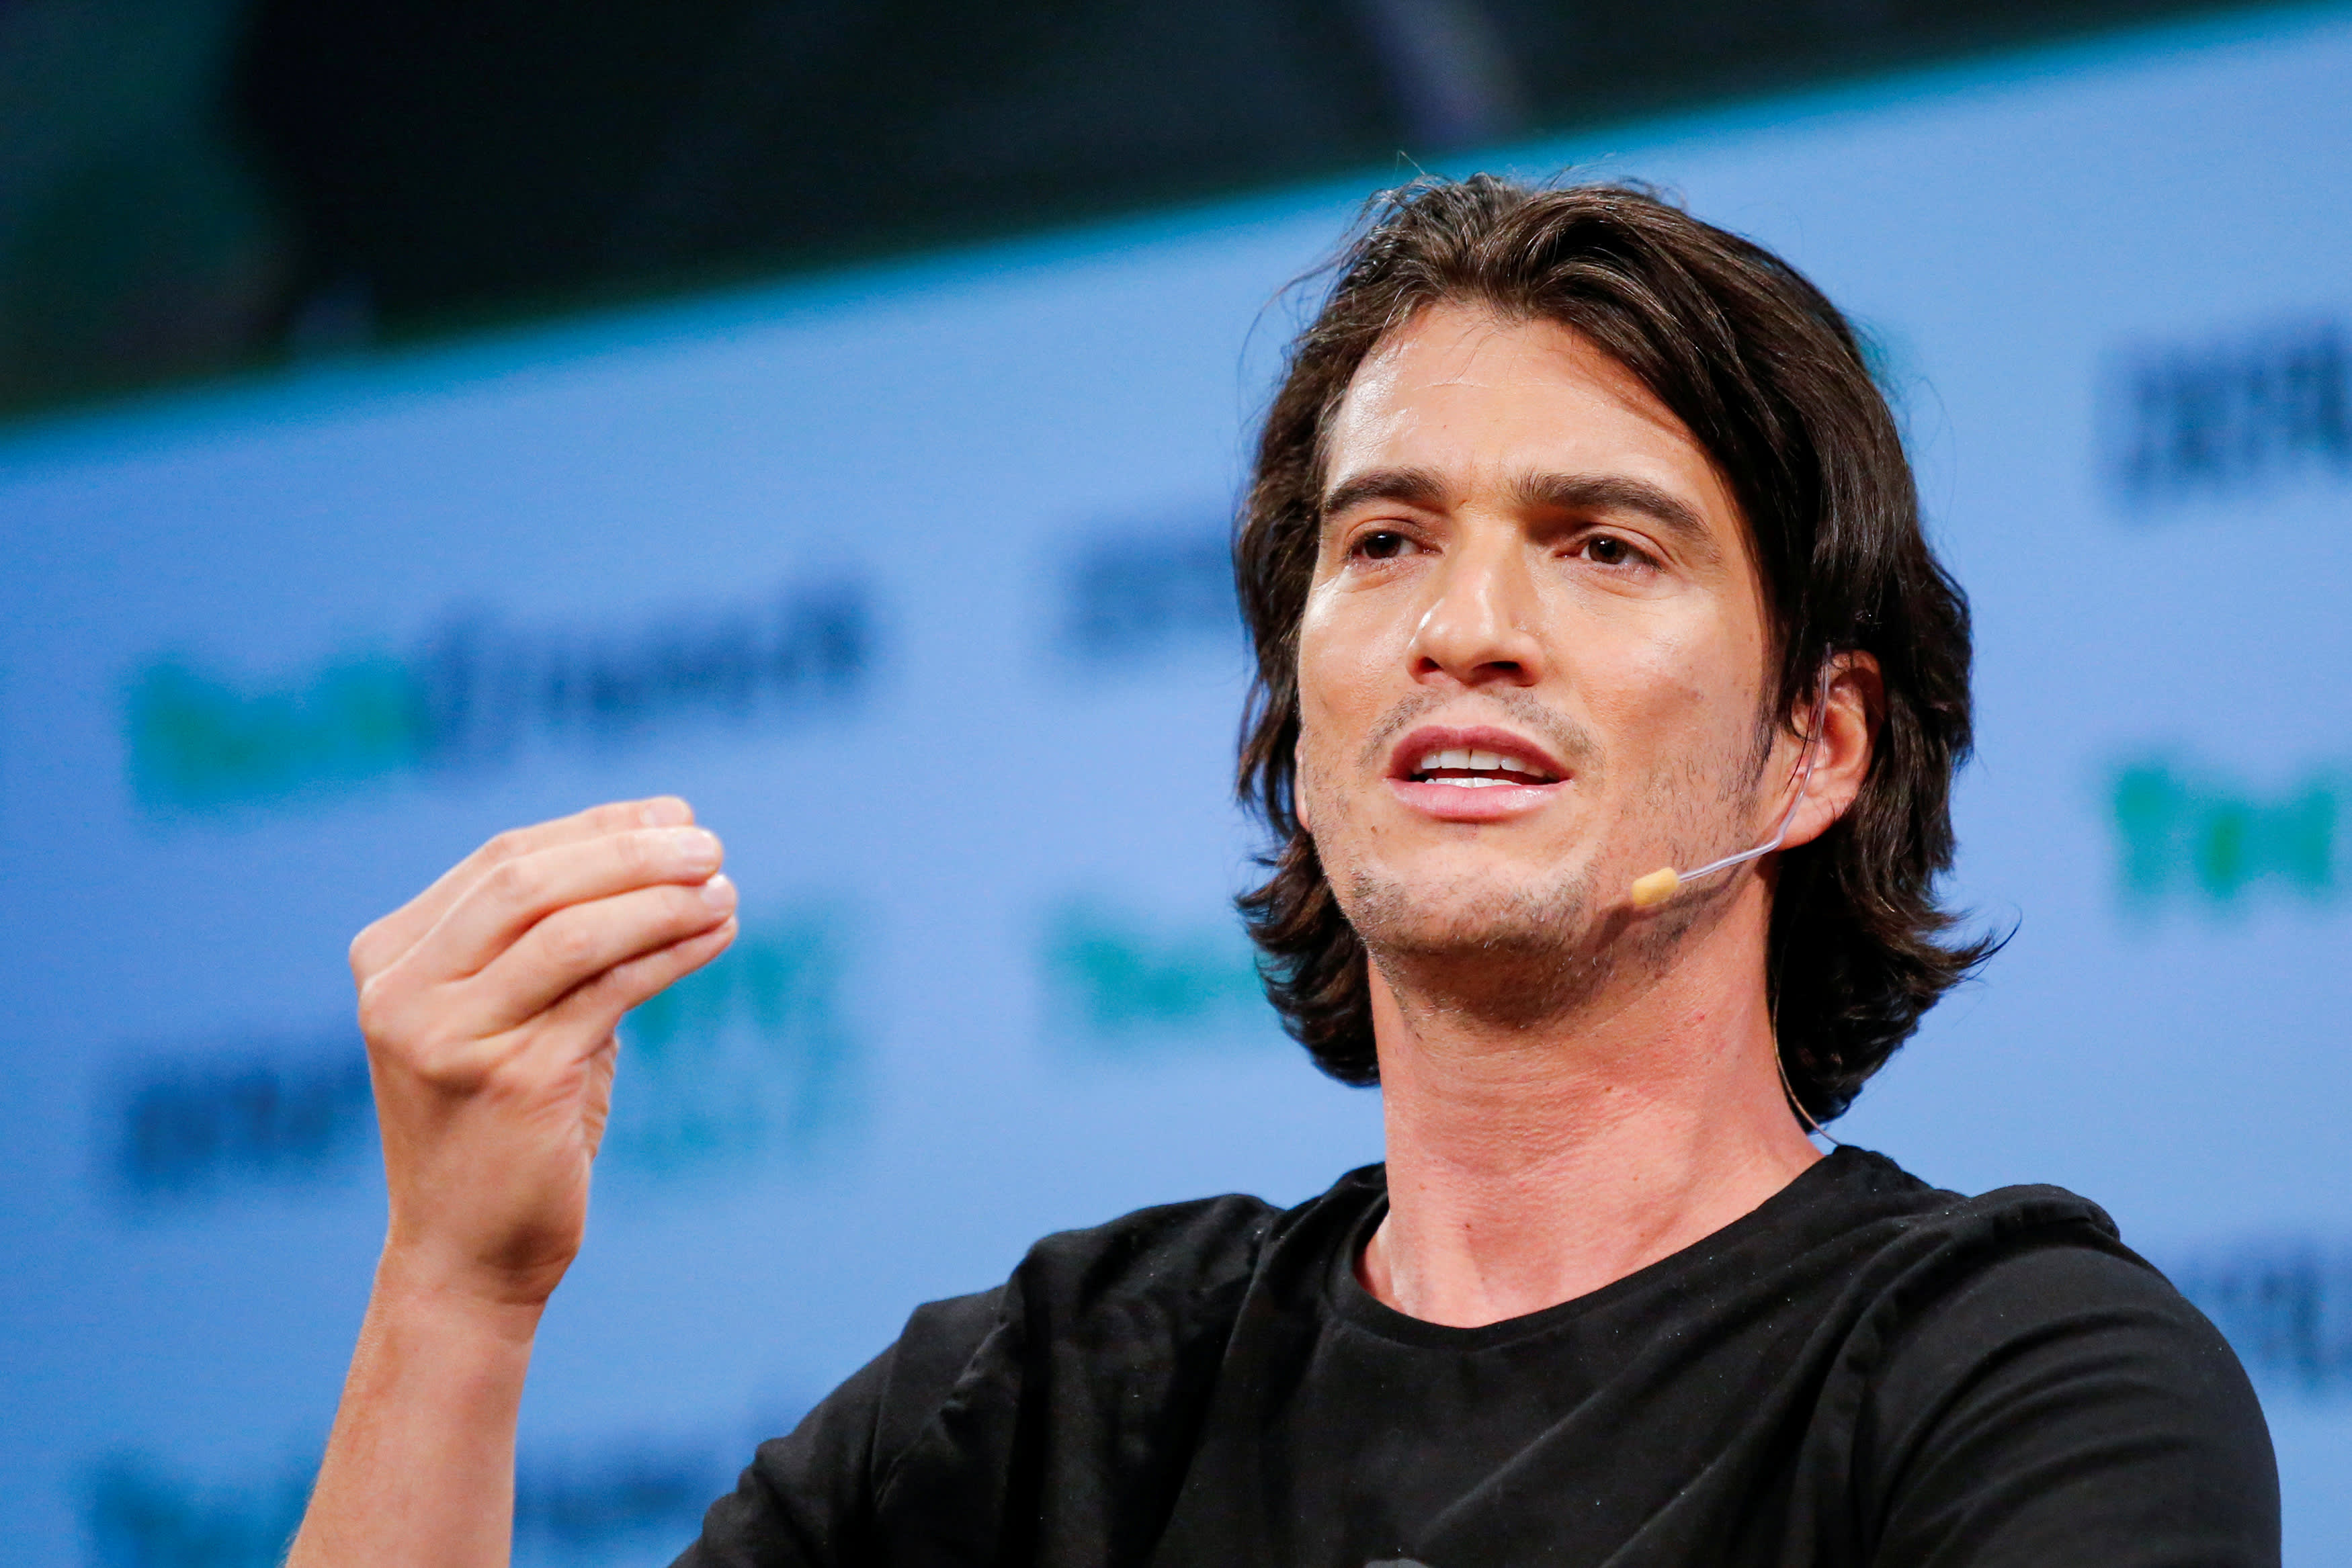 WeWork's Adam Neumann offered package worth up to $1.7 billion to step down from board